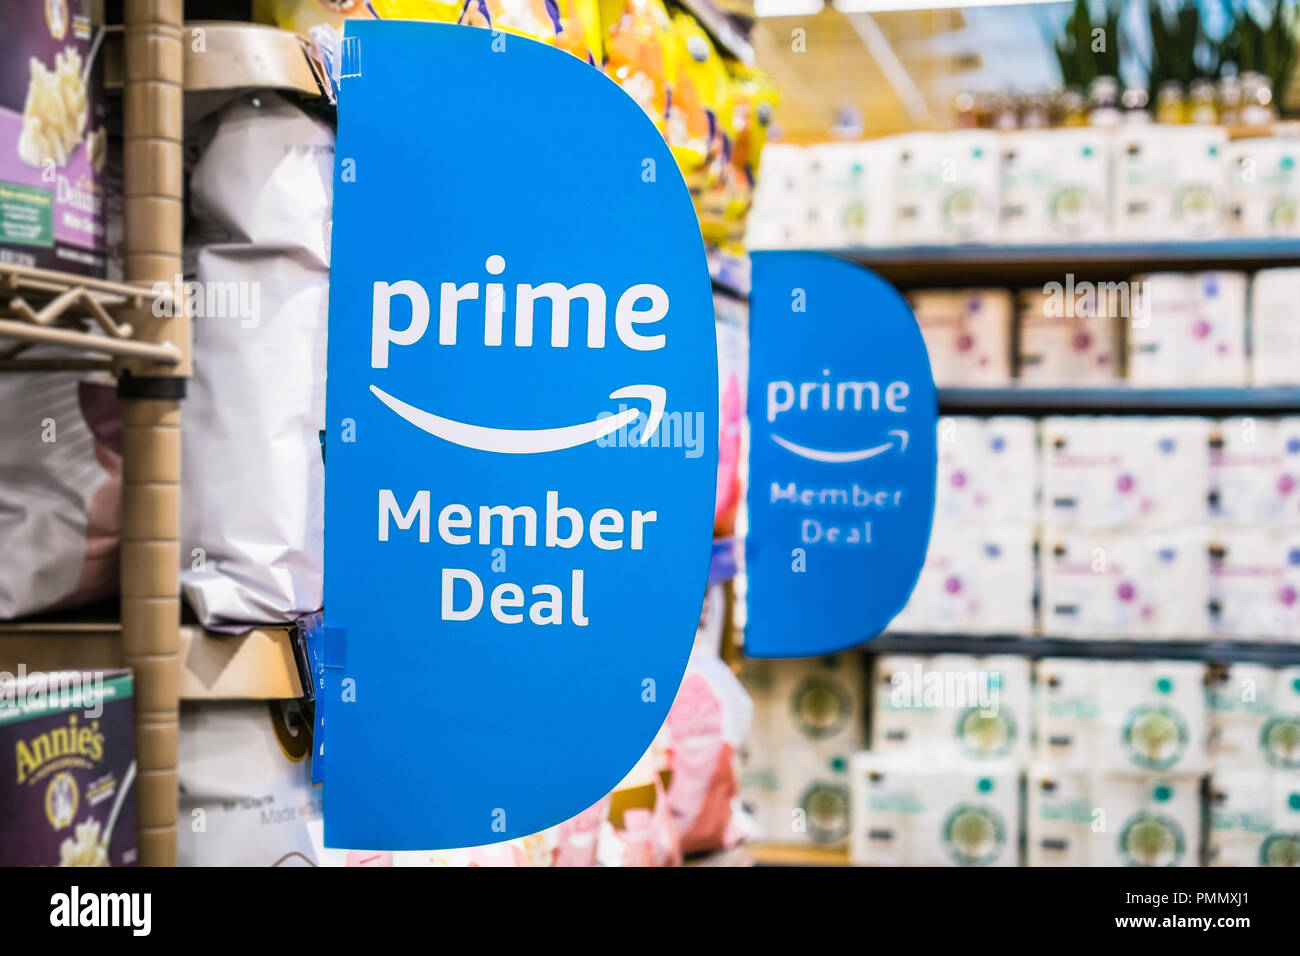 September 6, 2018 Los Altos/CA/USA - Amazon Prime Mitglied Deal in ein Whole Foods Stores in South San Francisco Bay Area angezeigt Stockfoto